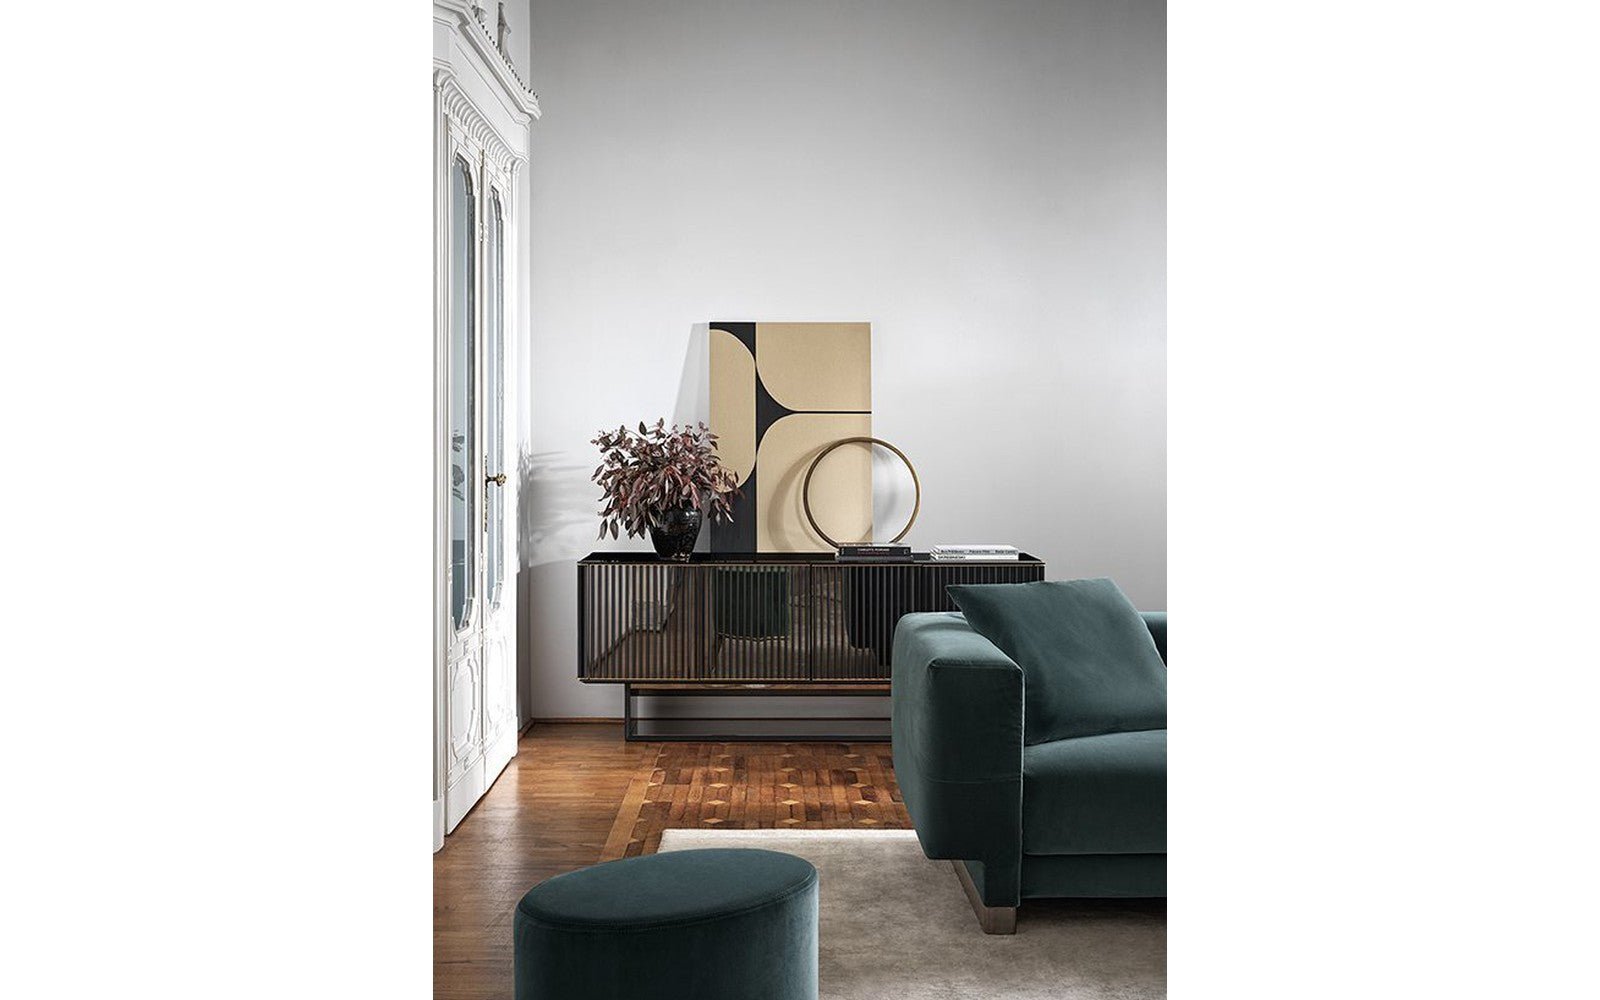 5th Avenue Credence Sideboard